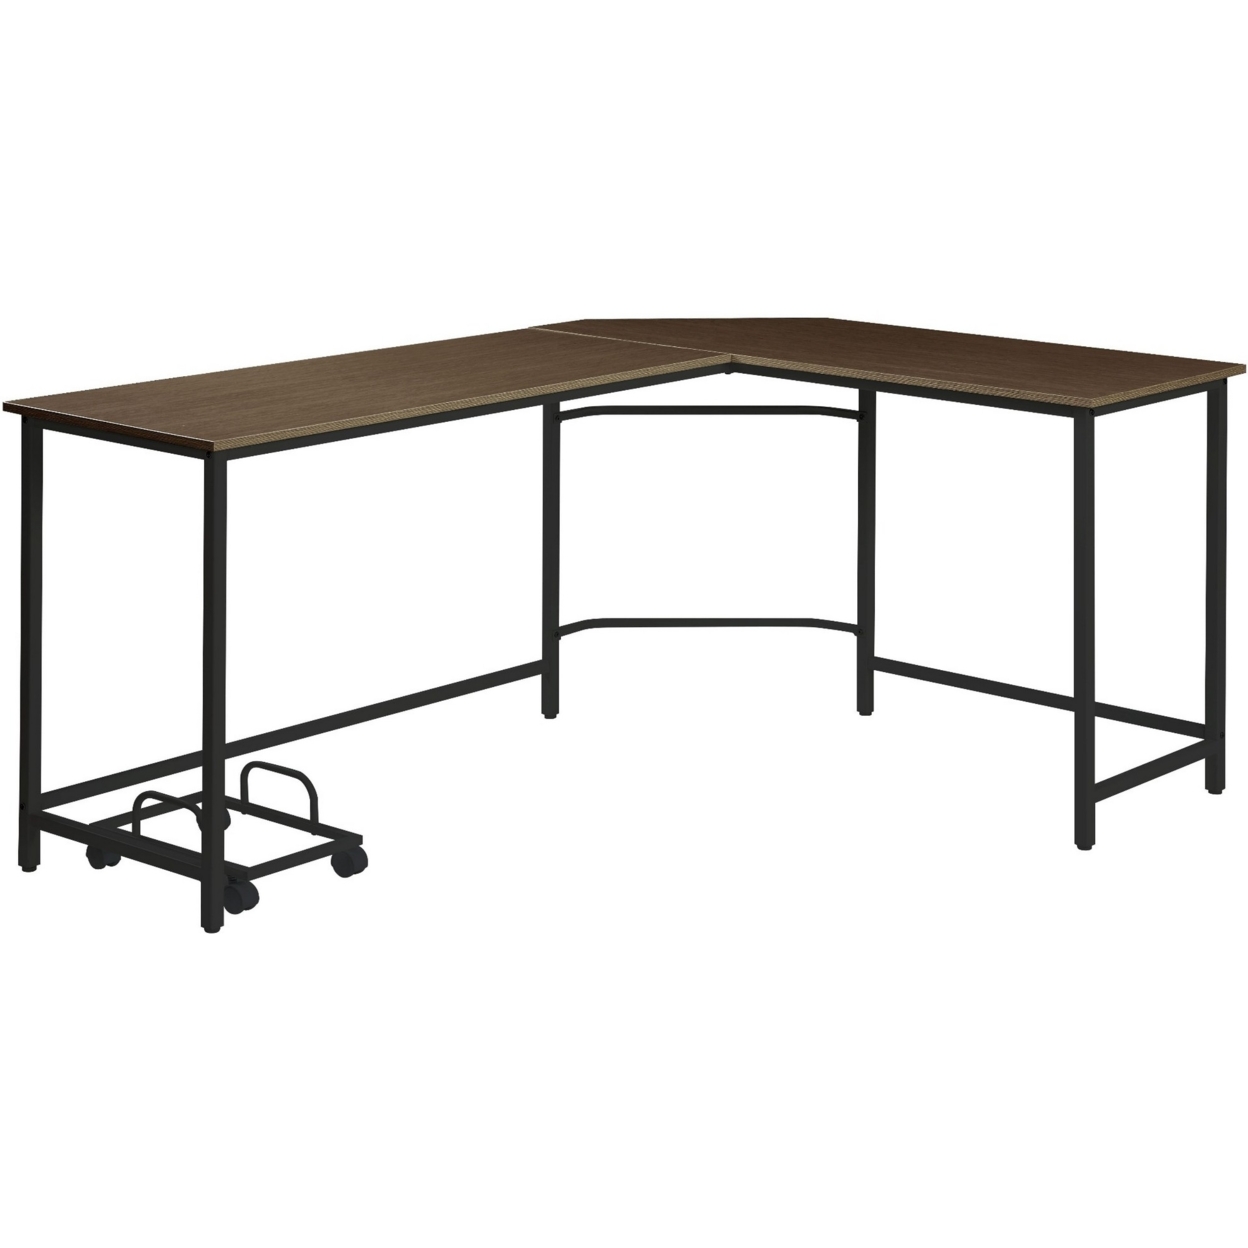 L Shape Computer Desk With CPU Holder And Casters, Brown- Saltoro Sherpi